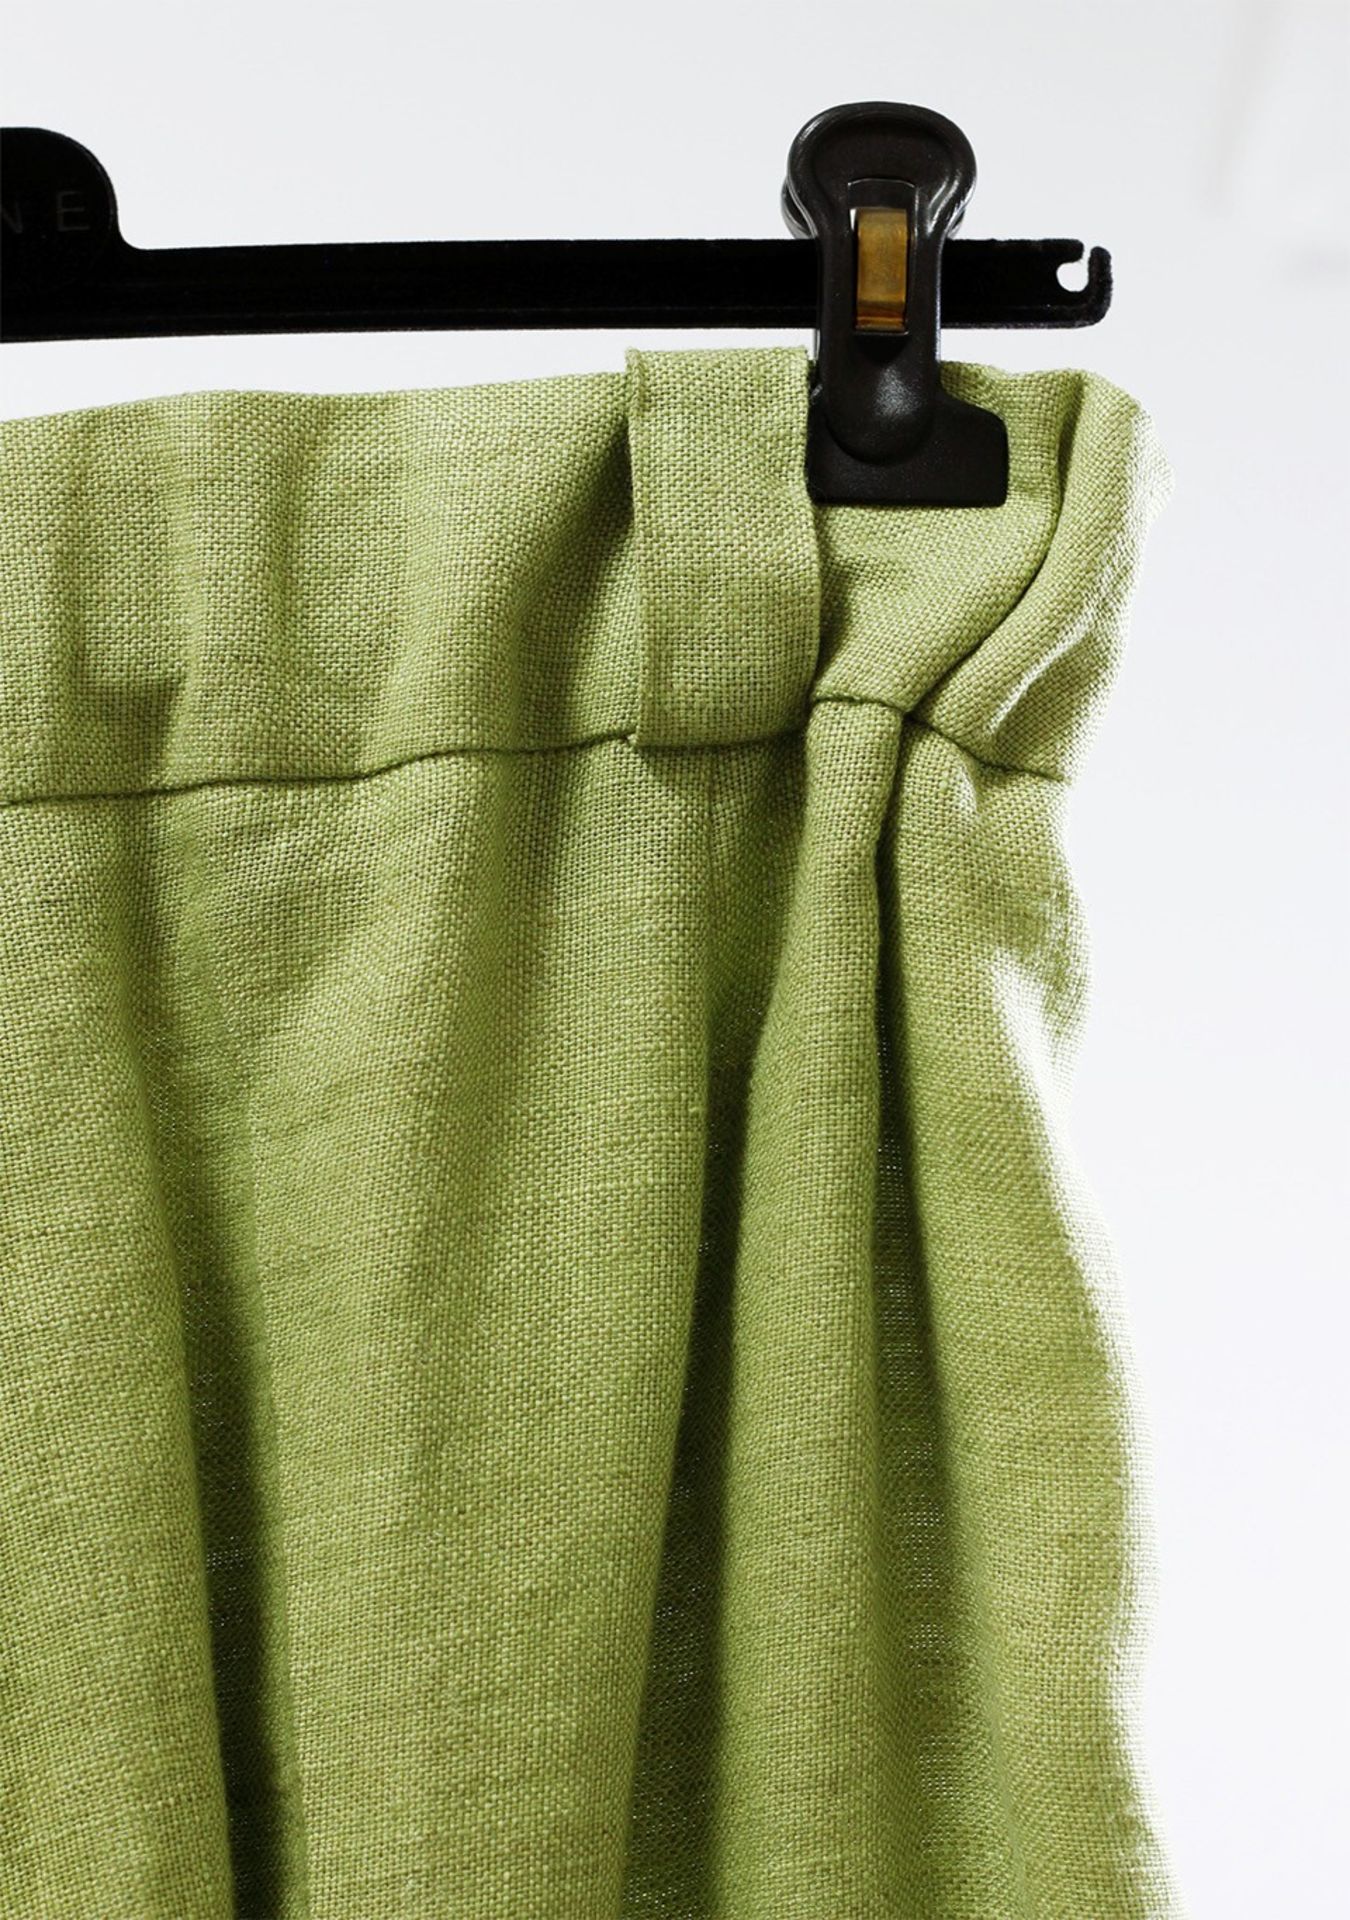 1 x Boutique Le Duc Avocado Trousers - From a High End Clothing Boutique In The - Image 5 of 5